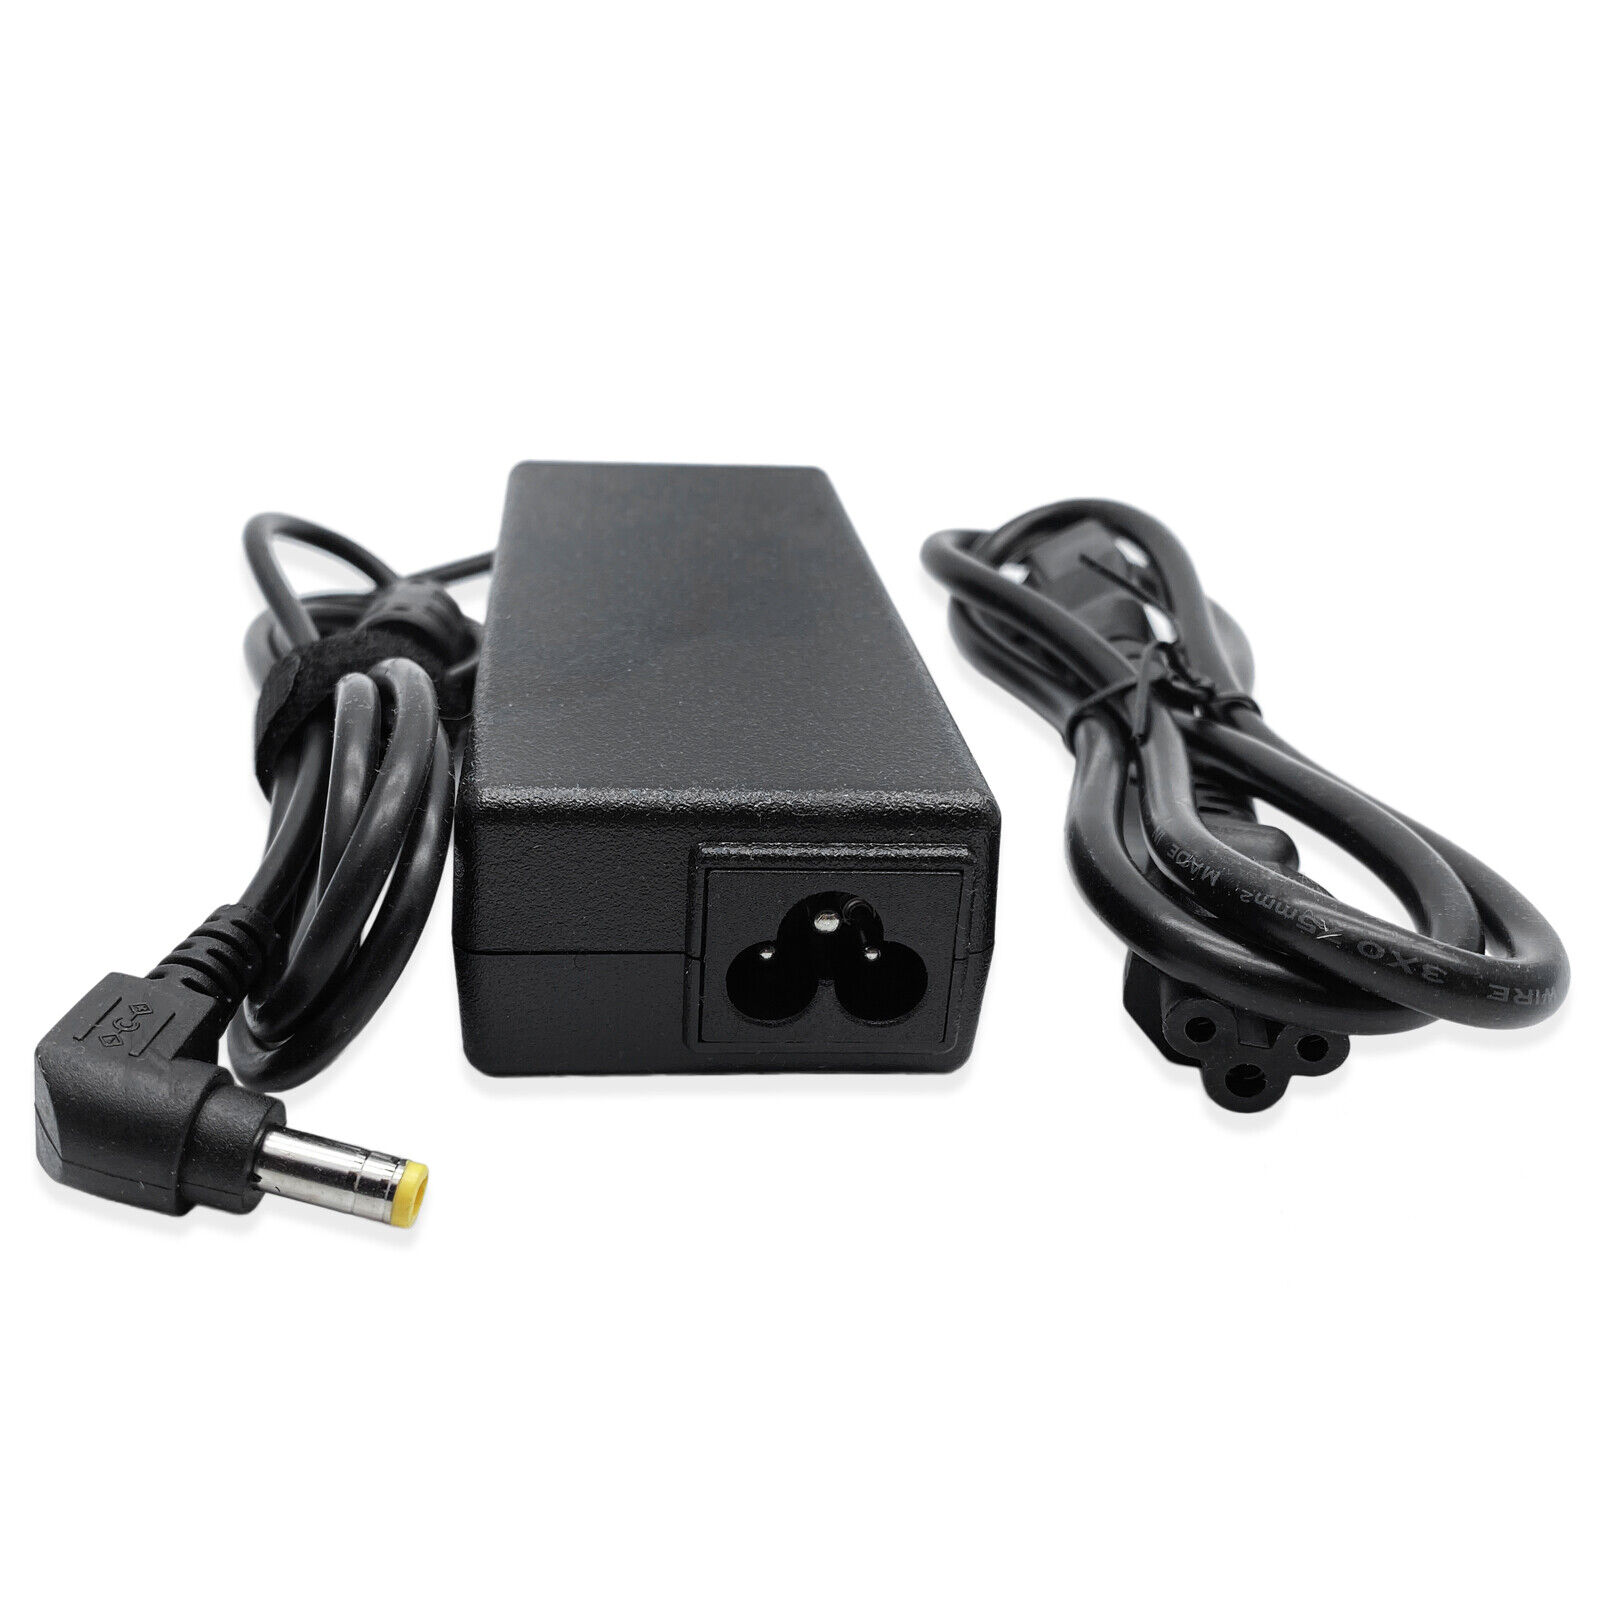 90W For ASUS Chromebox 3 CN65 Mini Desktop PC Charger AC Adapter Power Cord